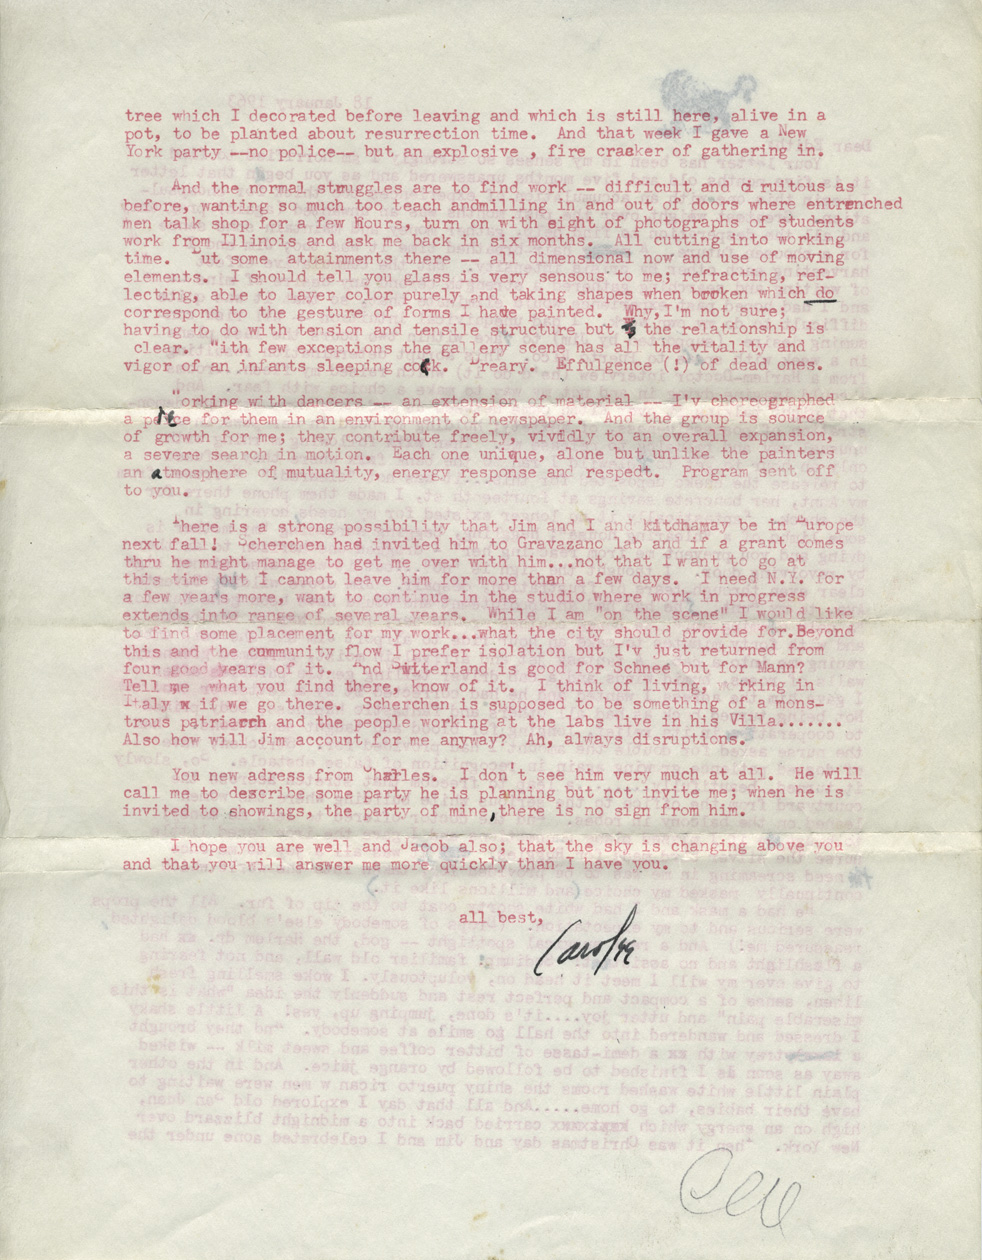 Letter from Carolee Schneemann to Edith Schloss, January 18, 1963. From the Edith Schloss Burckhardt Archive located at TK.